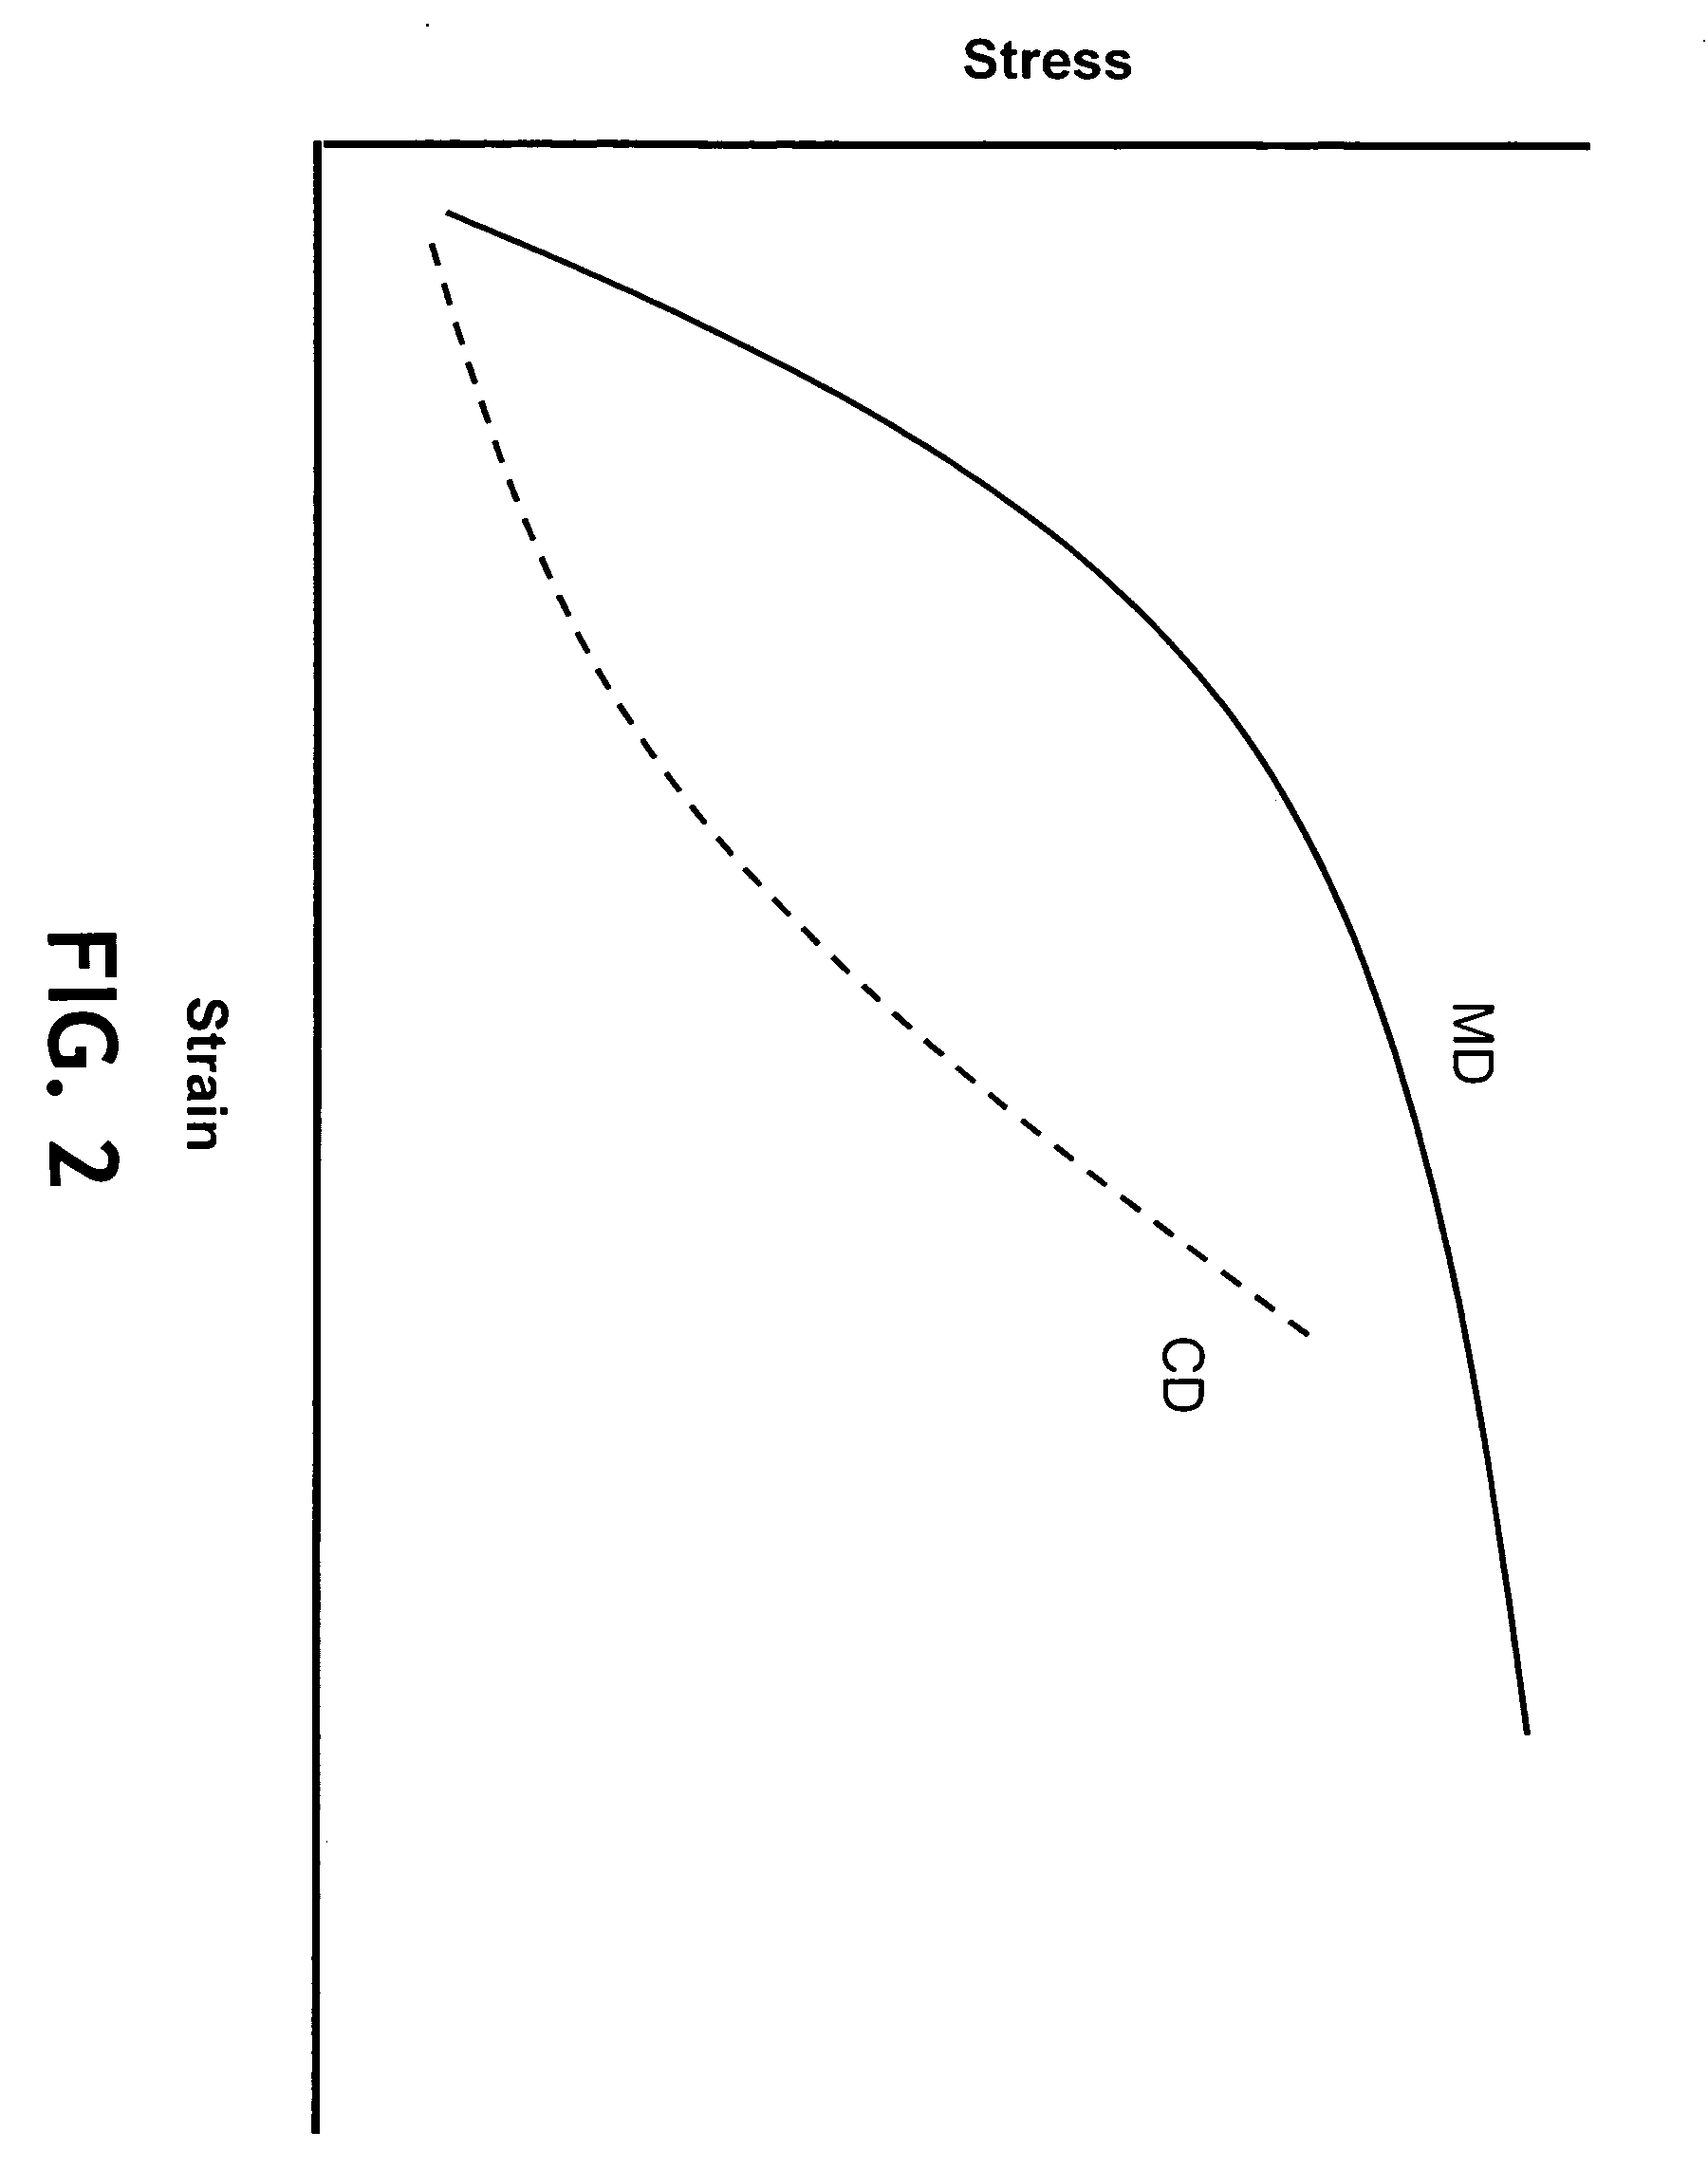 Tissue products having substantially equal machine direction and cross-machine direction mechanical properties